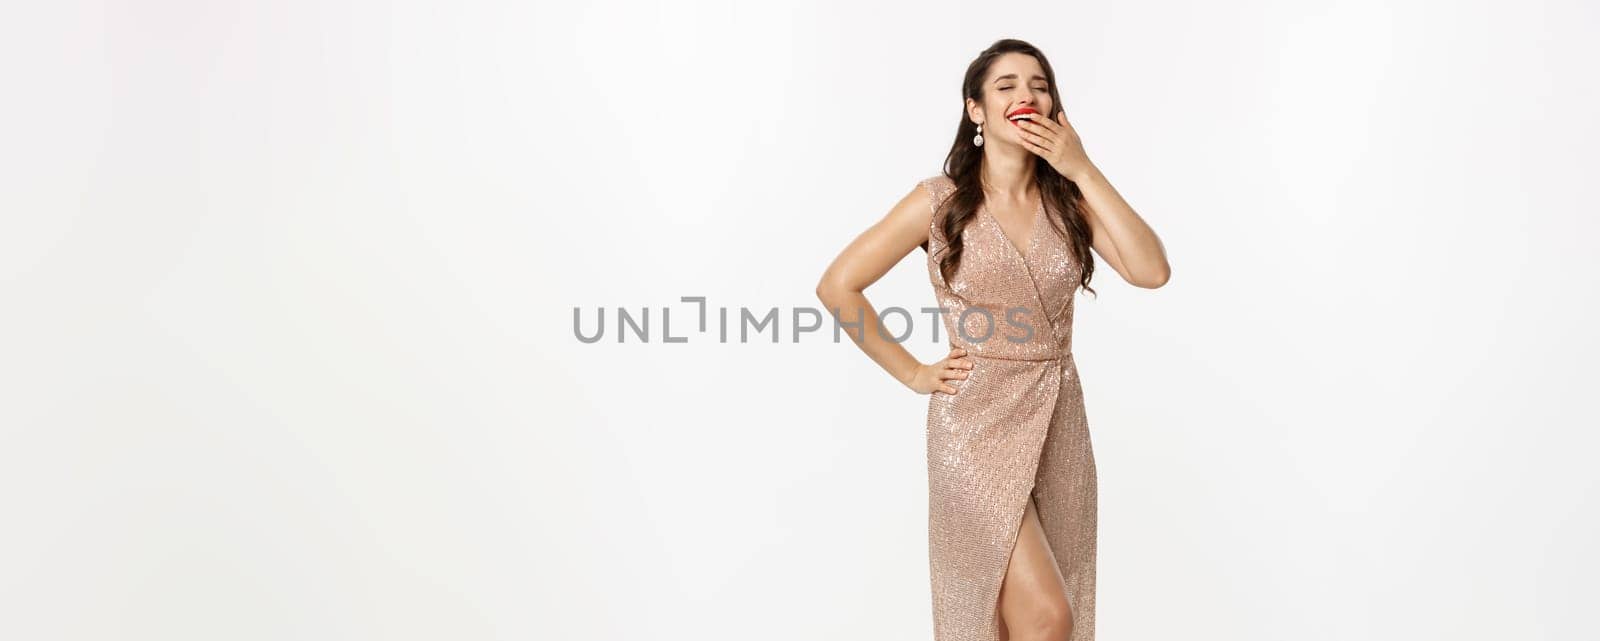 Christmas party and celebration concept. Full length of glamour woman in elegant dress, laughing and looking happy, having fun, white background.